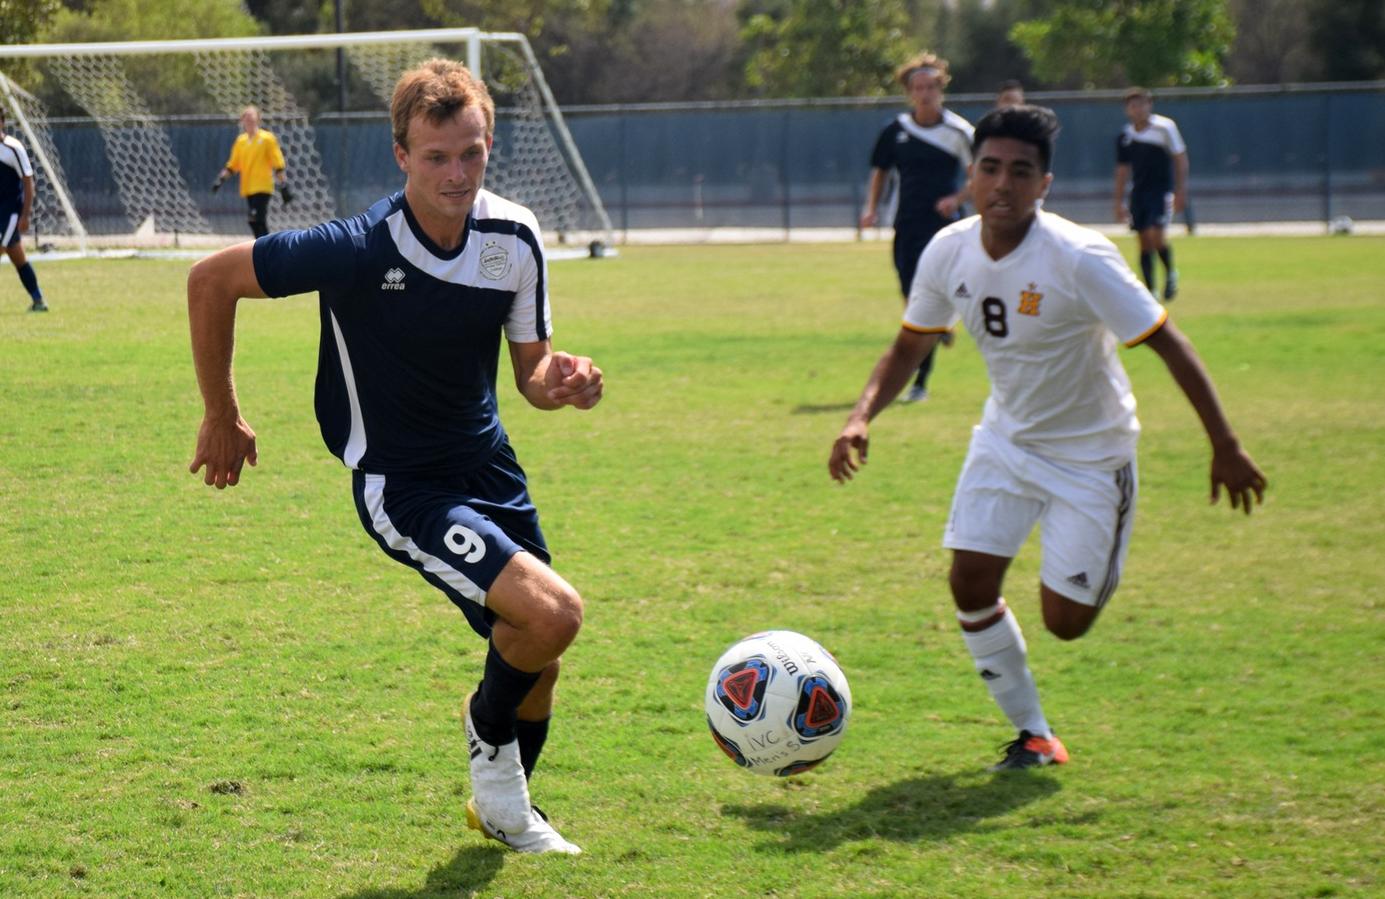 Men's soccer team finishes week strong, shuts out Hartnell